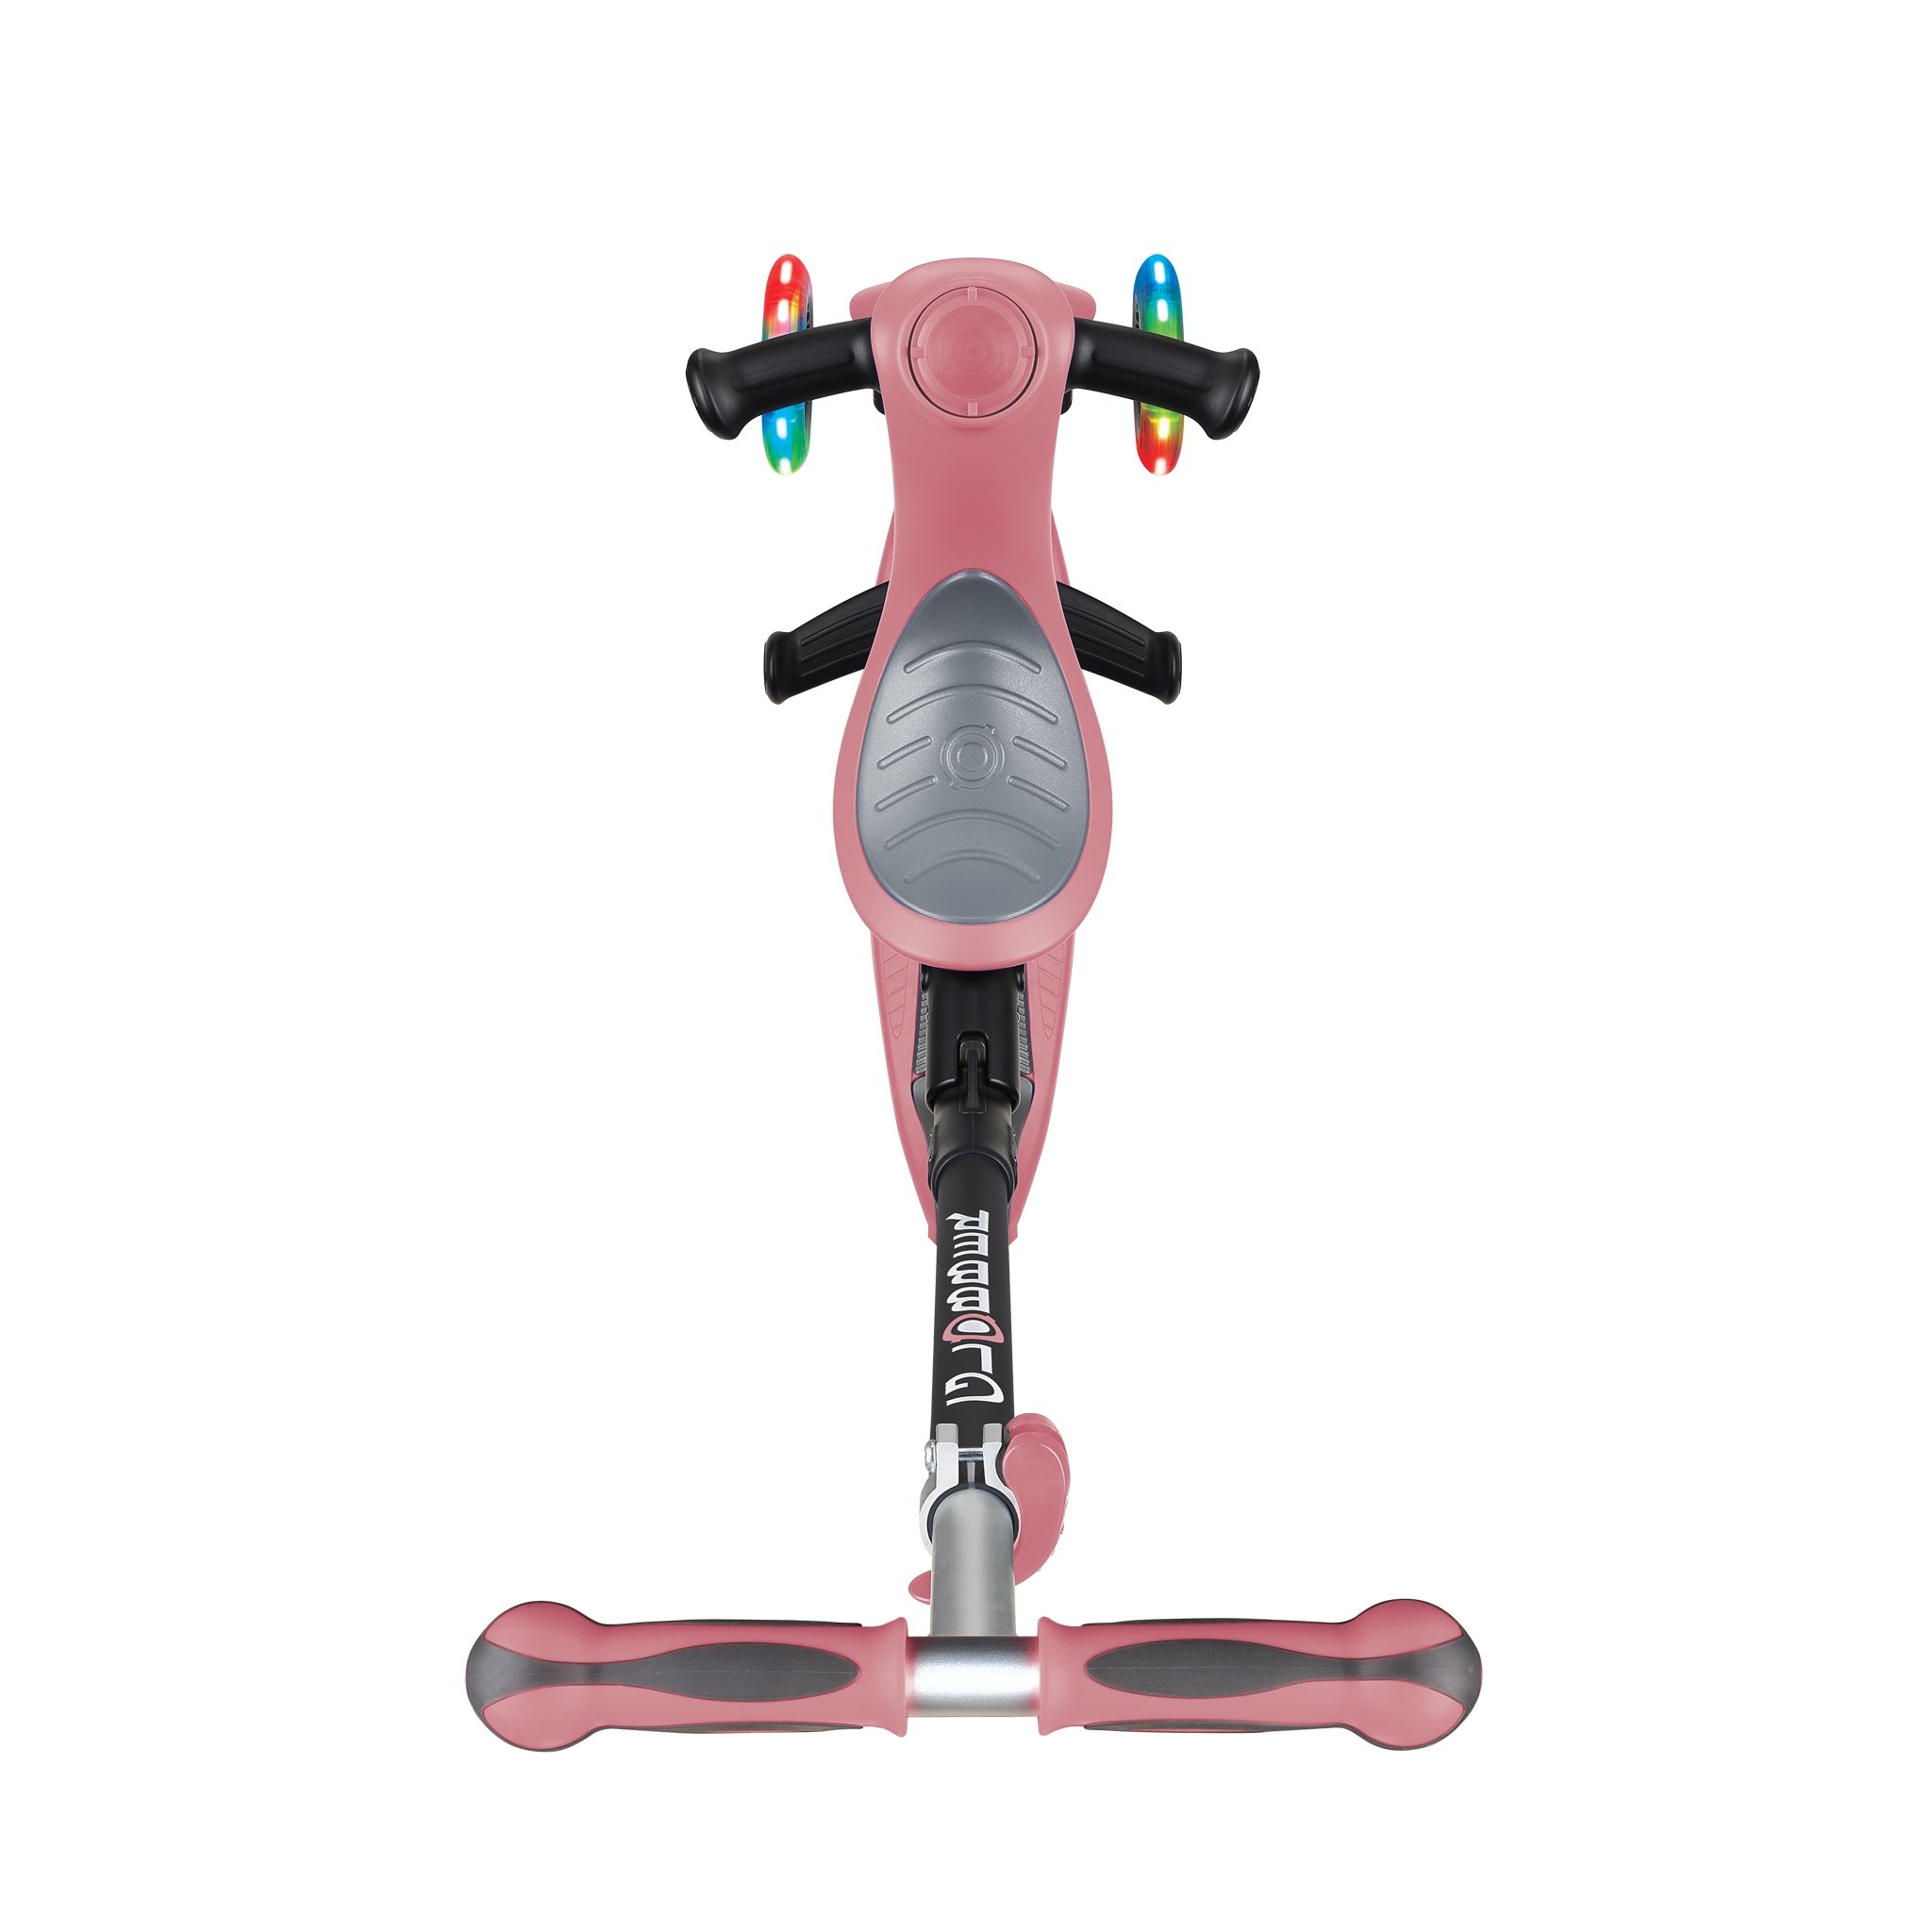 GO-UP-DELUXE-LIGHTS-ride-on-walking-bike-scooter-with-light-up-wheels-and-extra-wide-3-height-adjustable-seat-pastel-deep-pink 2